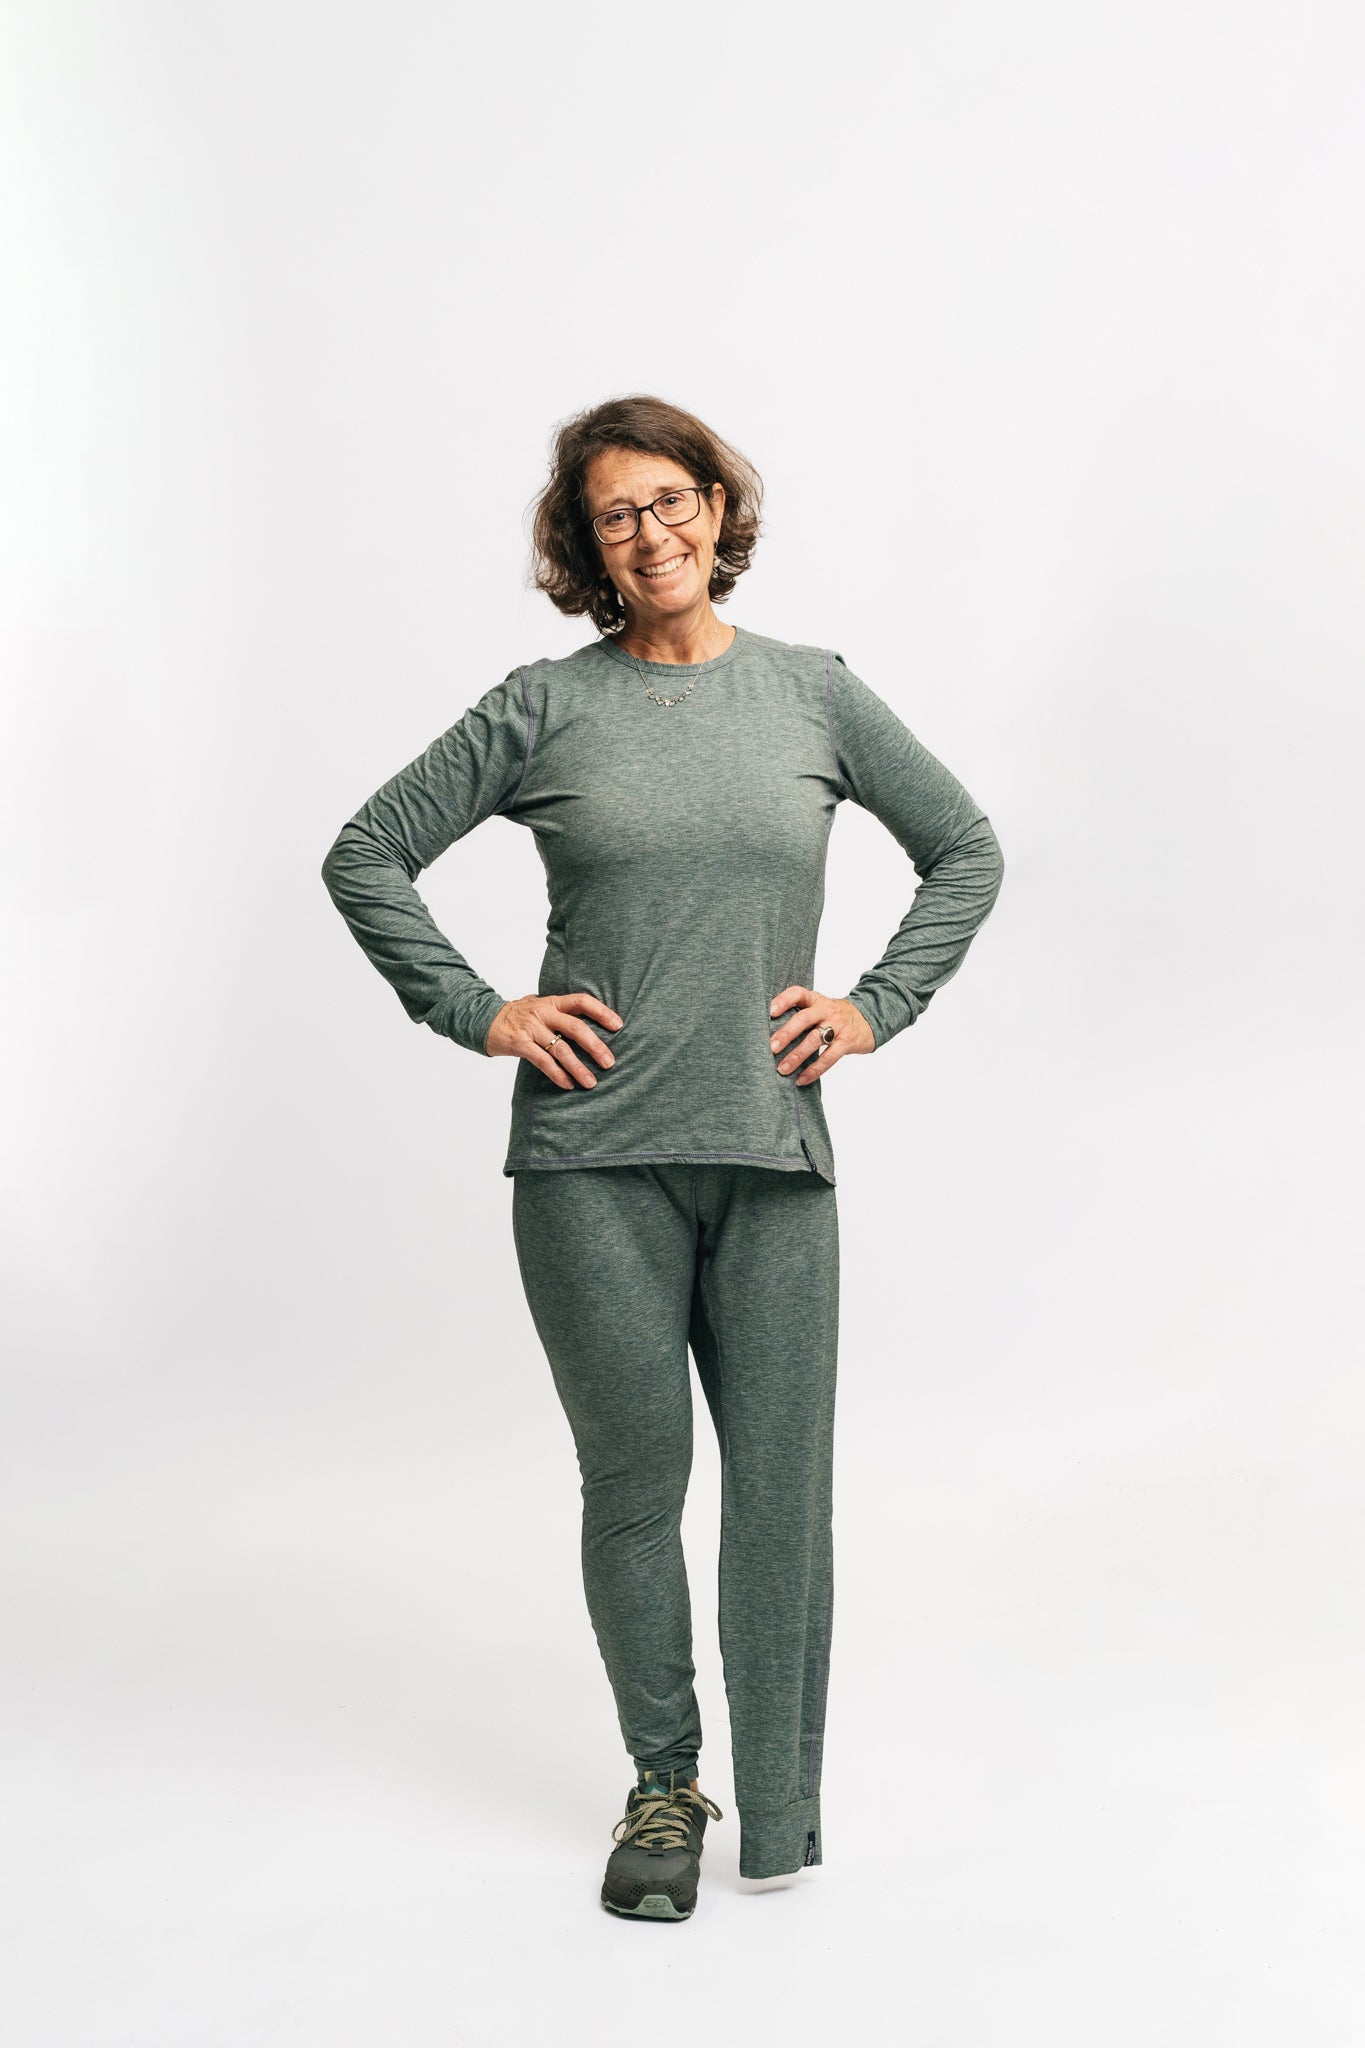 Women's Outdoor Clothing, Baselayer Bottoms